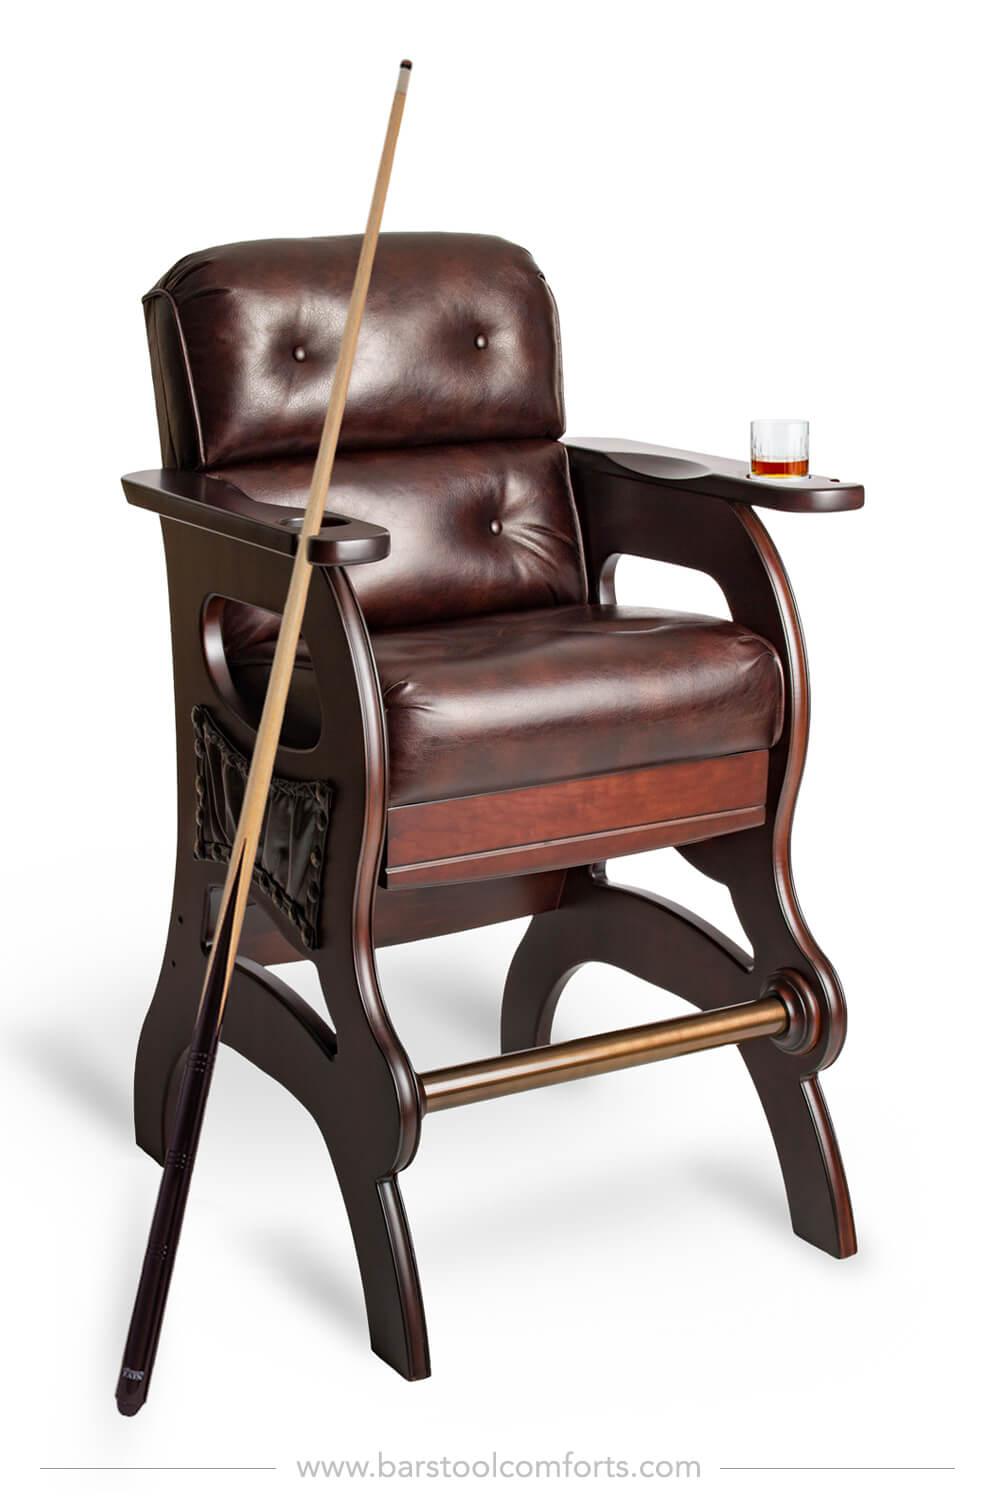 Mann Sports Theater High Back Billiards Chair with Arms